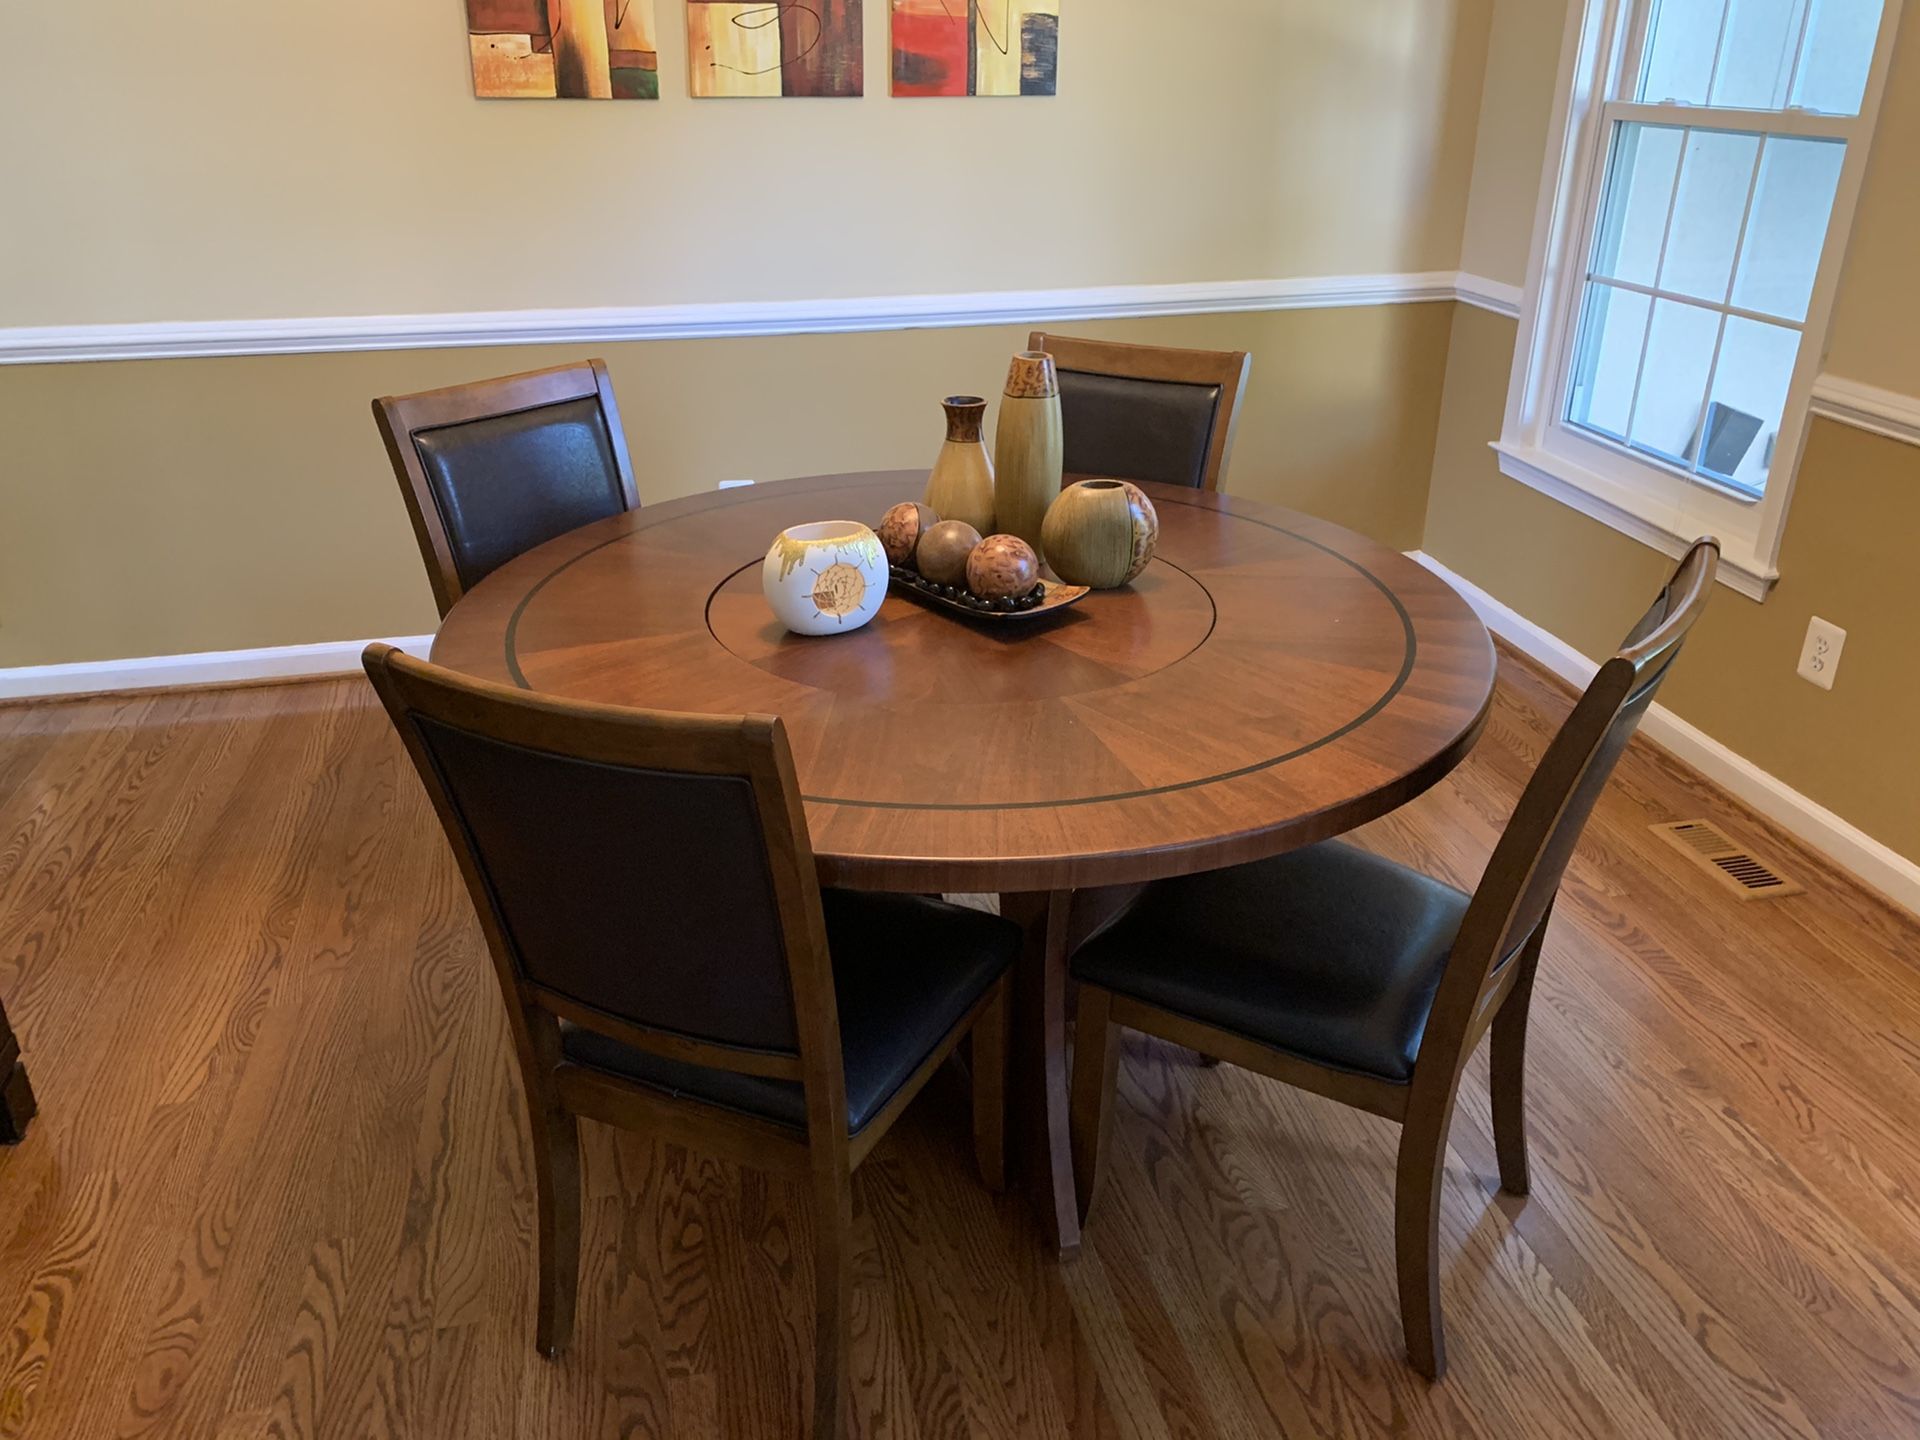 Table with 4 chairs. Center rotates